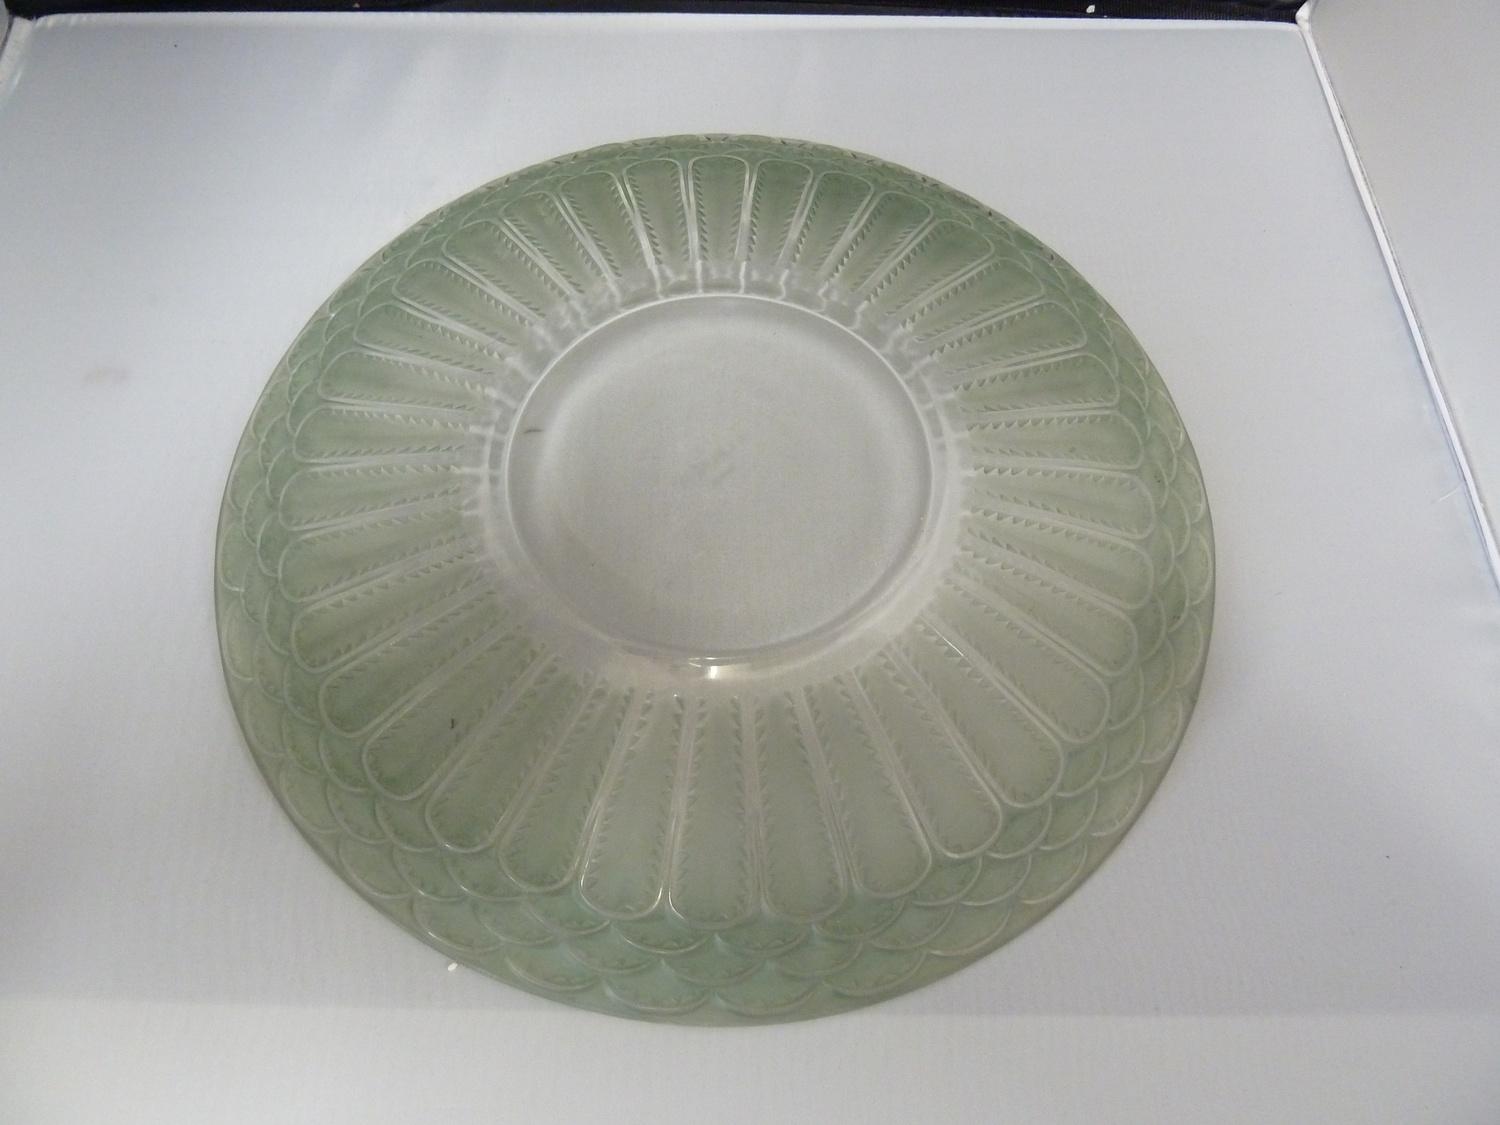 Rene Lalique - a Jaffa pattern charger, green patination, Model No: 3051 Circa 1931, acid etched - Image 2 of 3